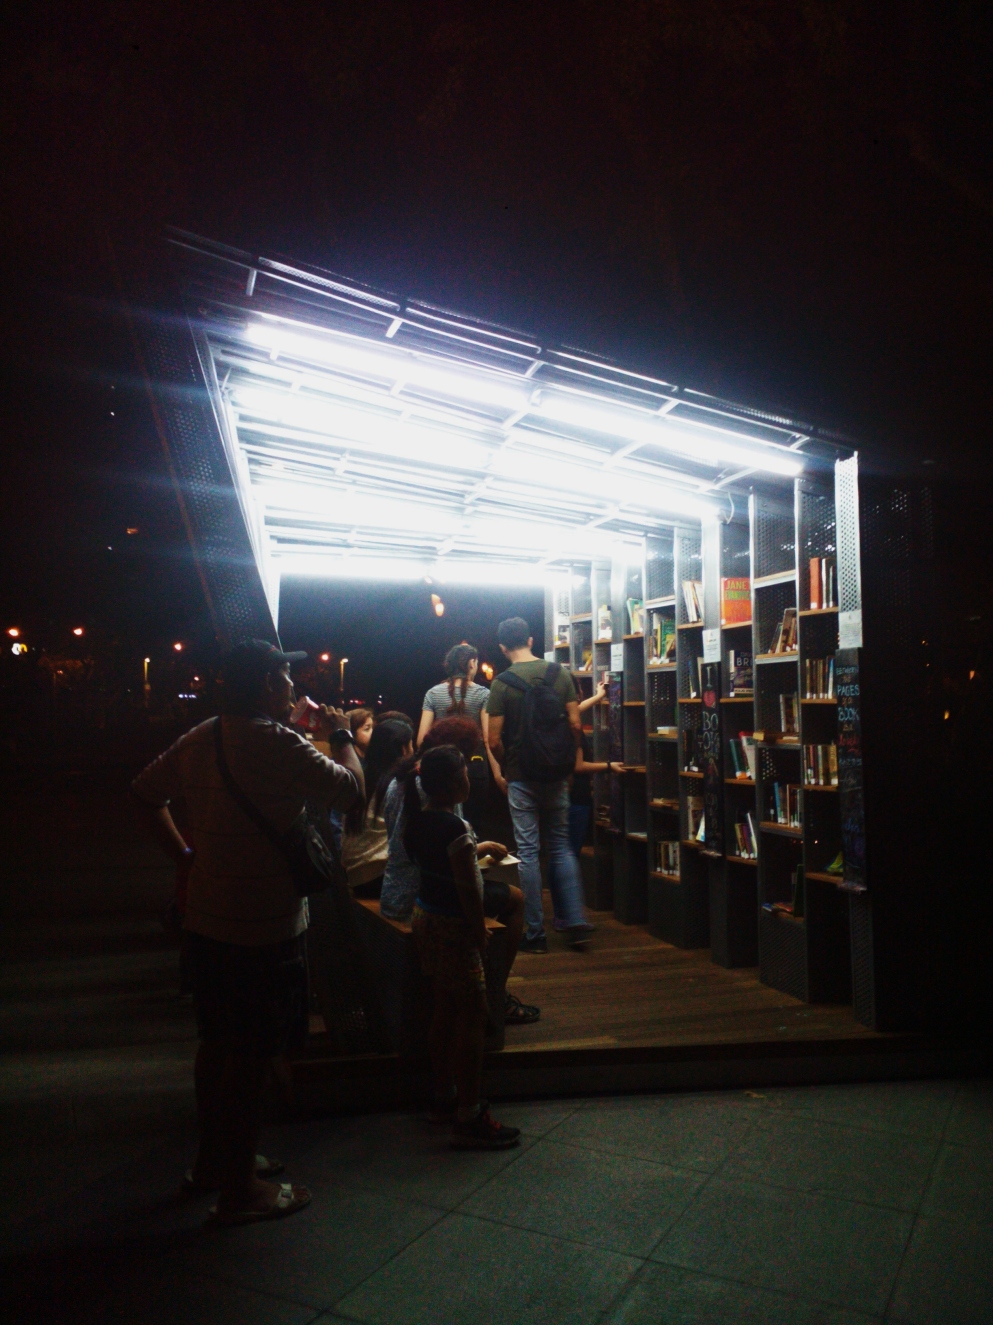 The book stop